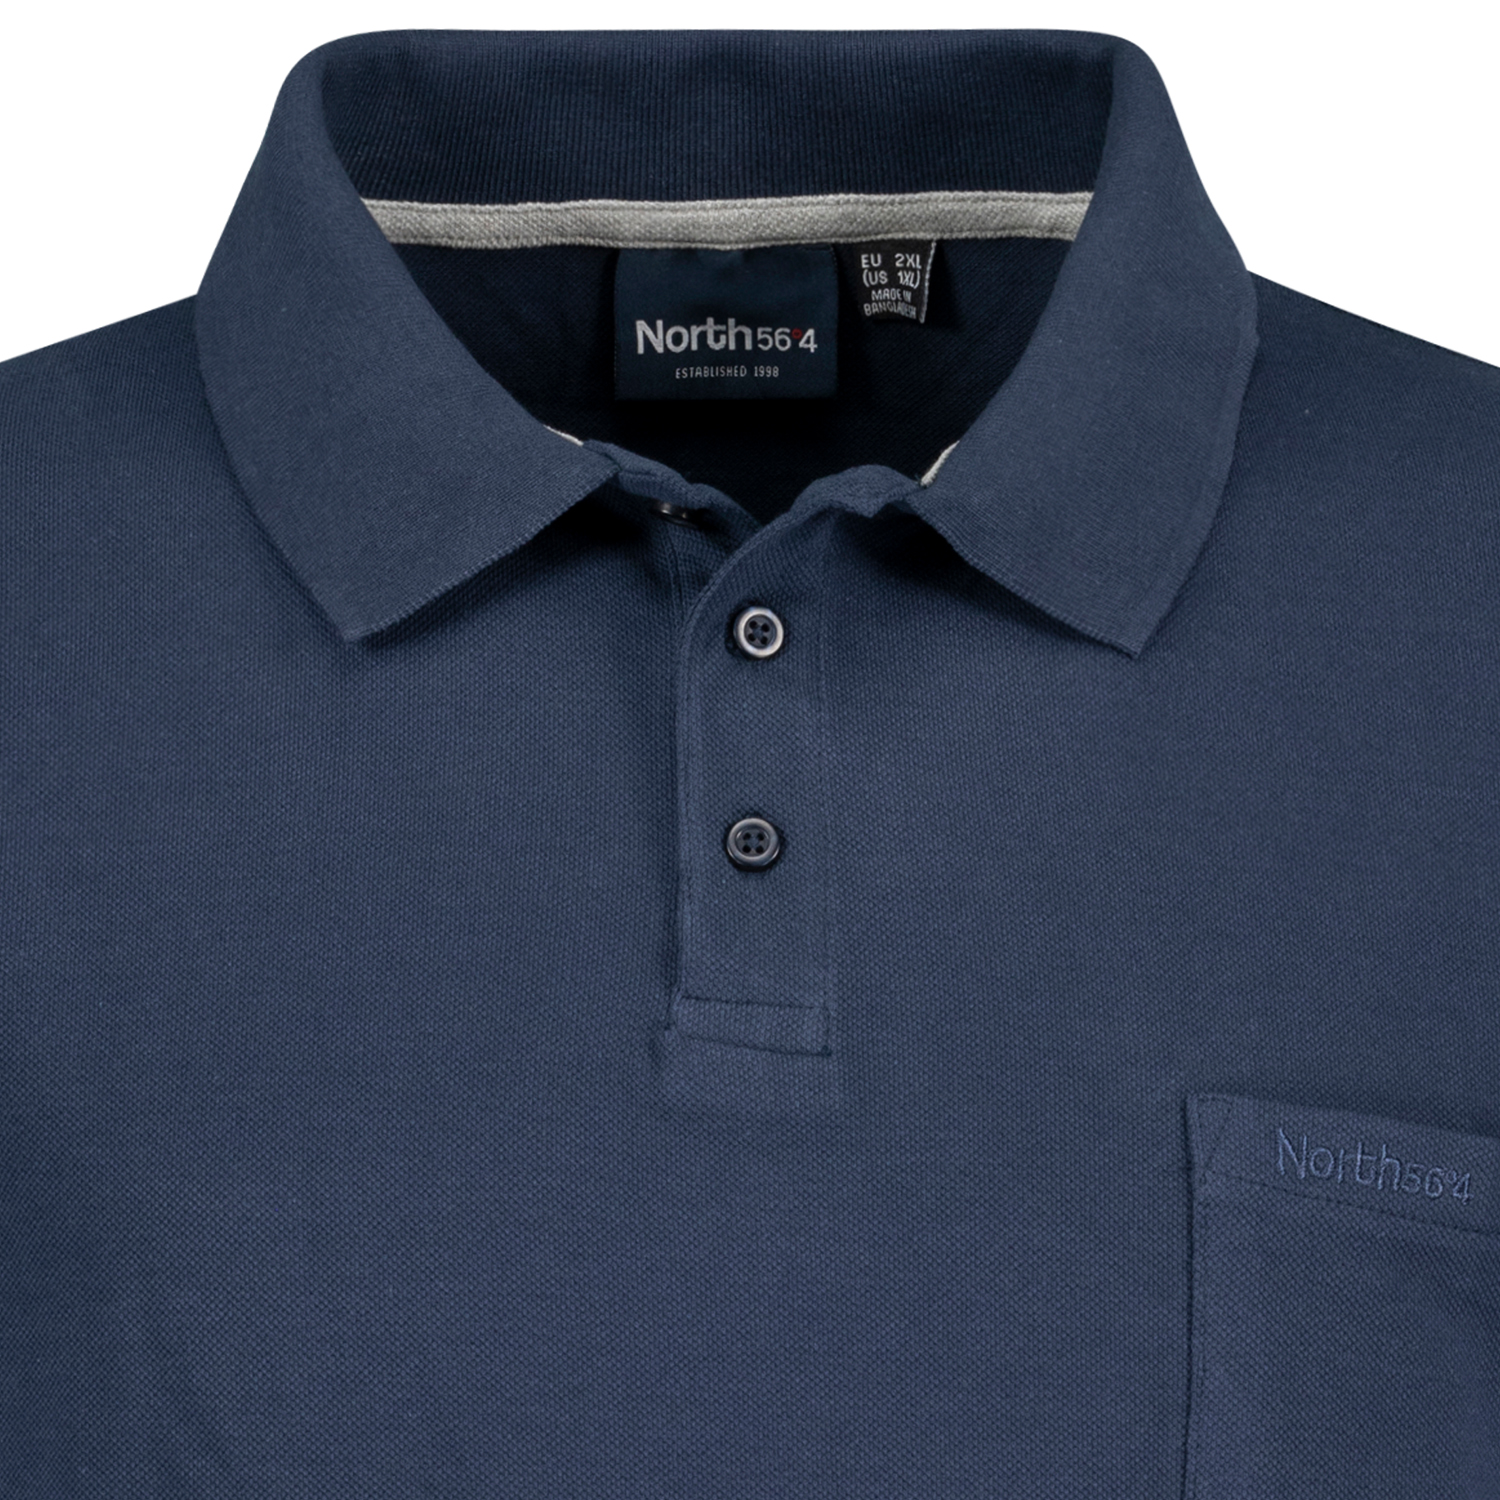 Pique poloshirt in navy by Greyes/North 56°4 in extra large sizes up to 8XL